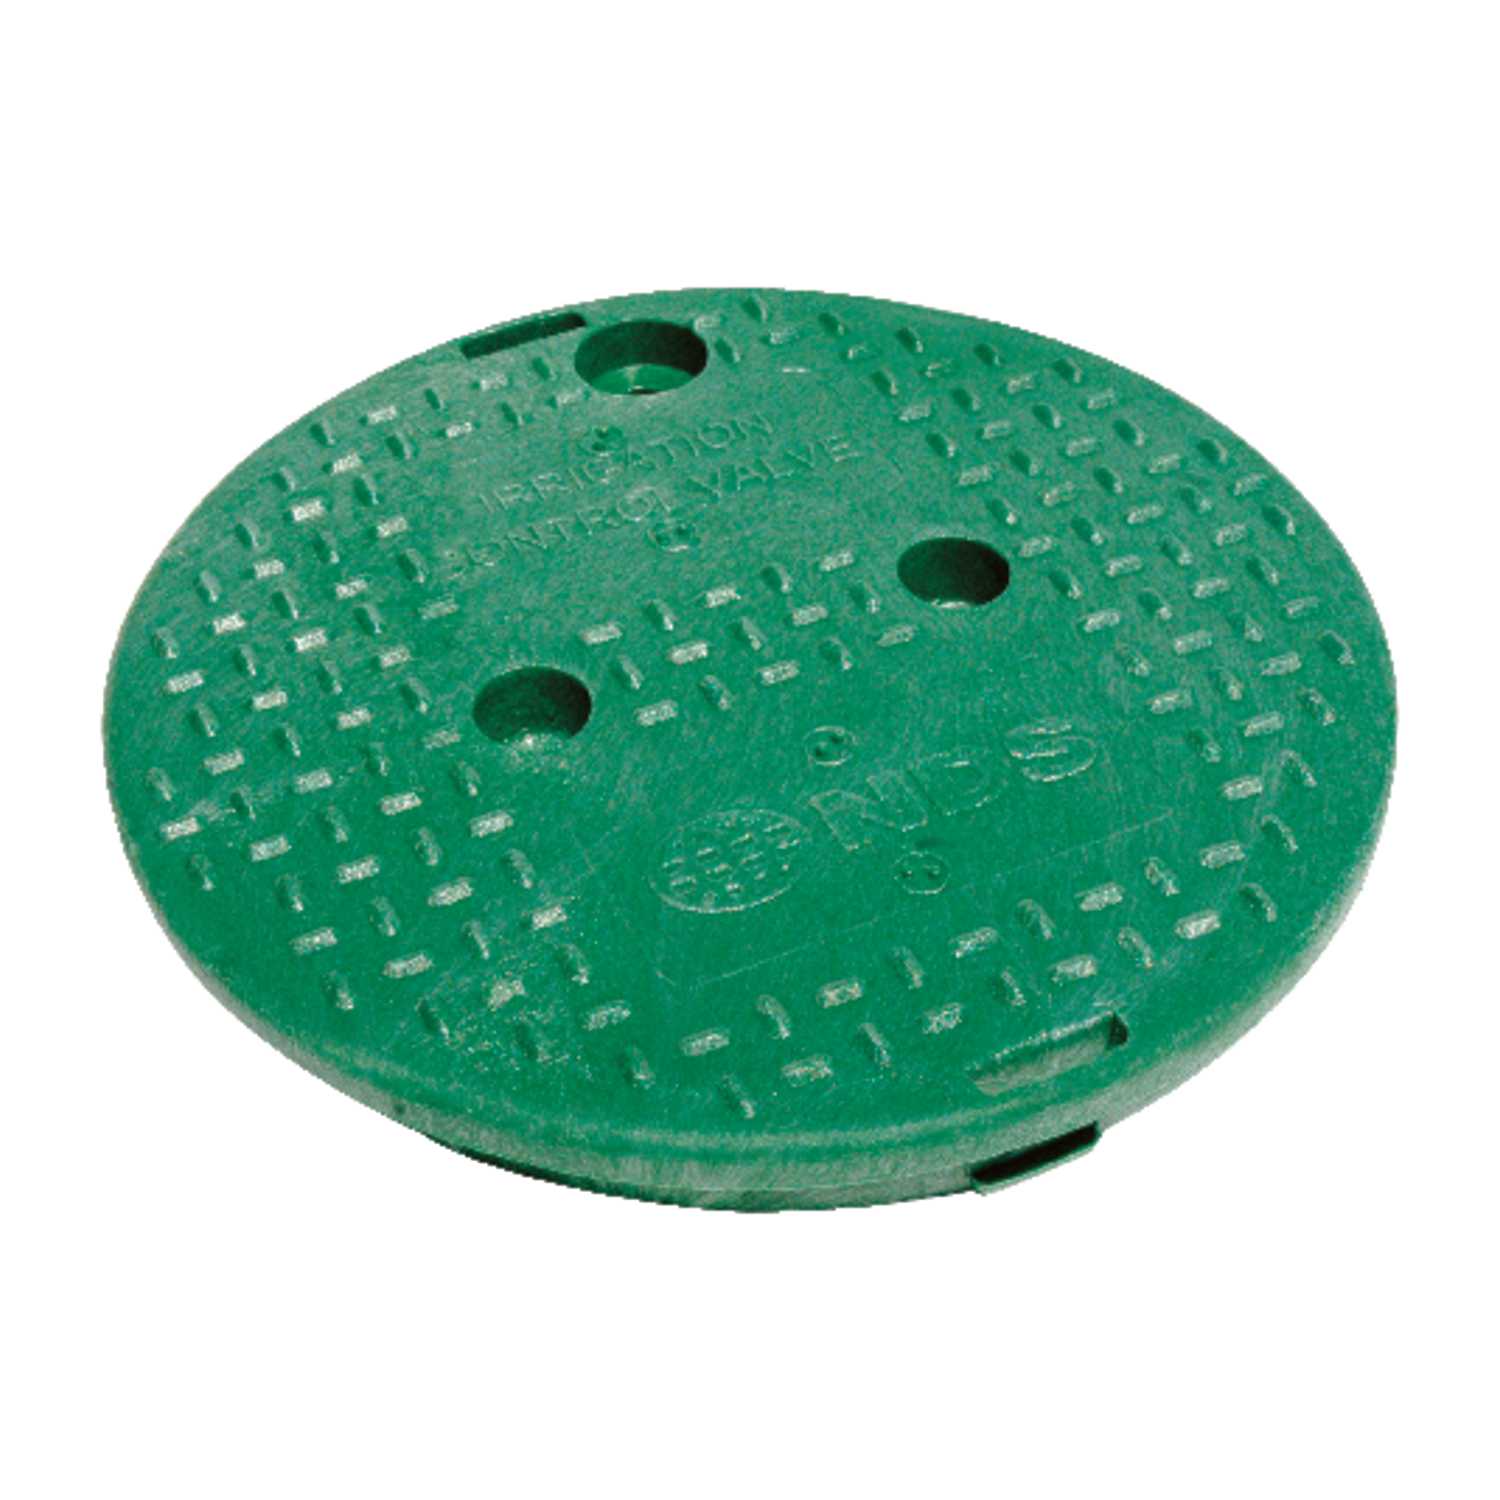 NDS 9.7 inch W x 9.7 inch H Round Valve Box Cover Green Ace Hardware